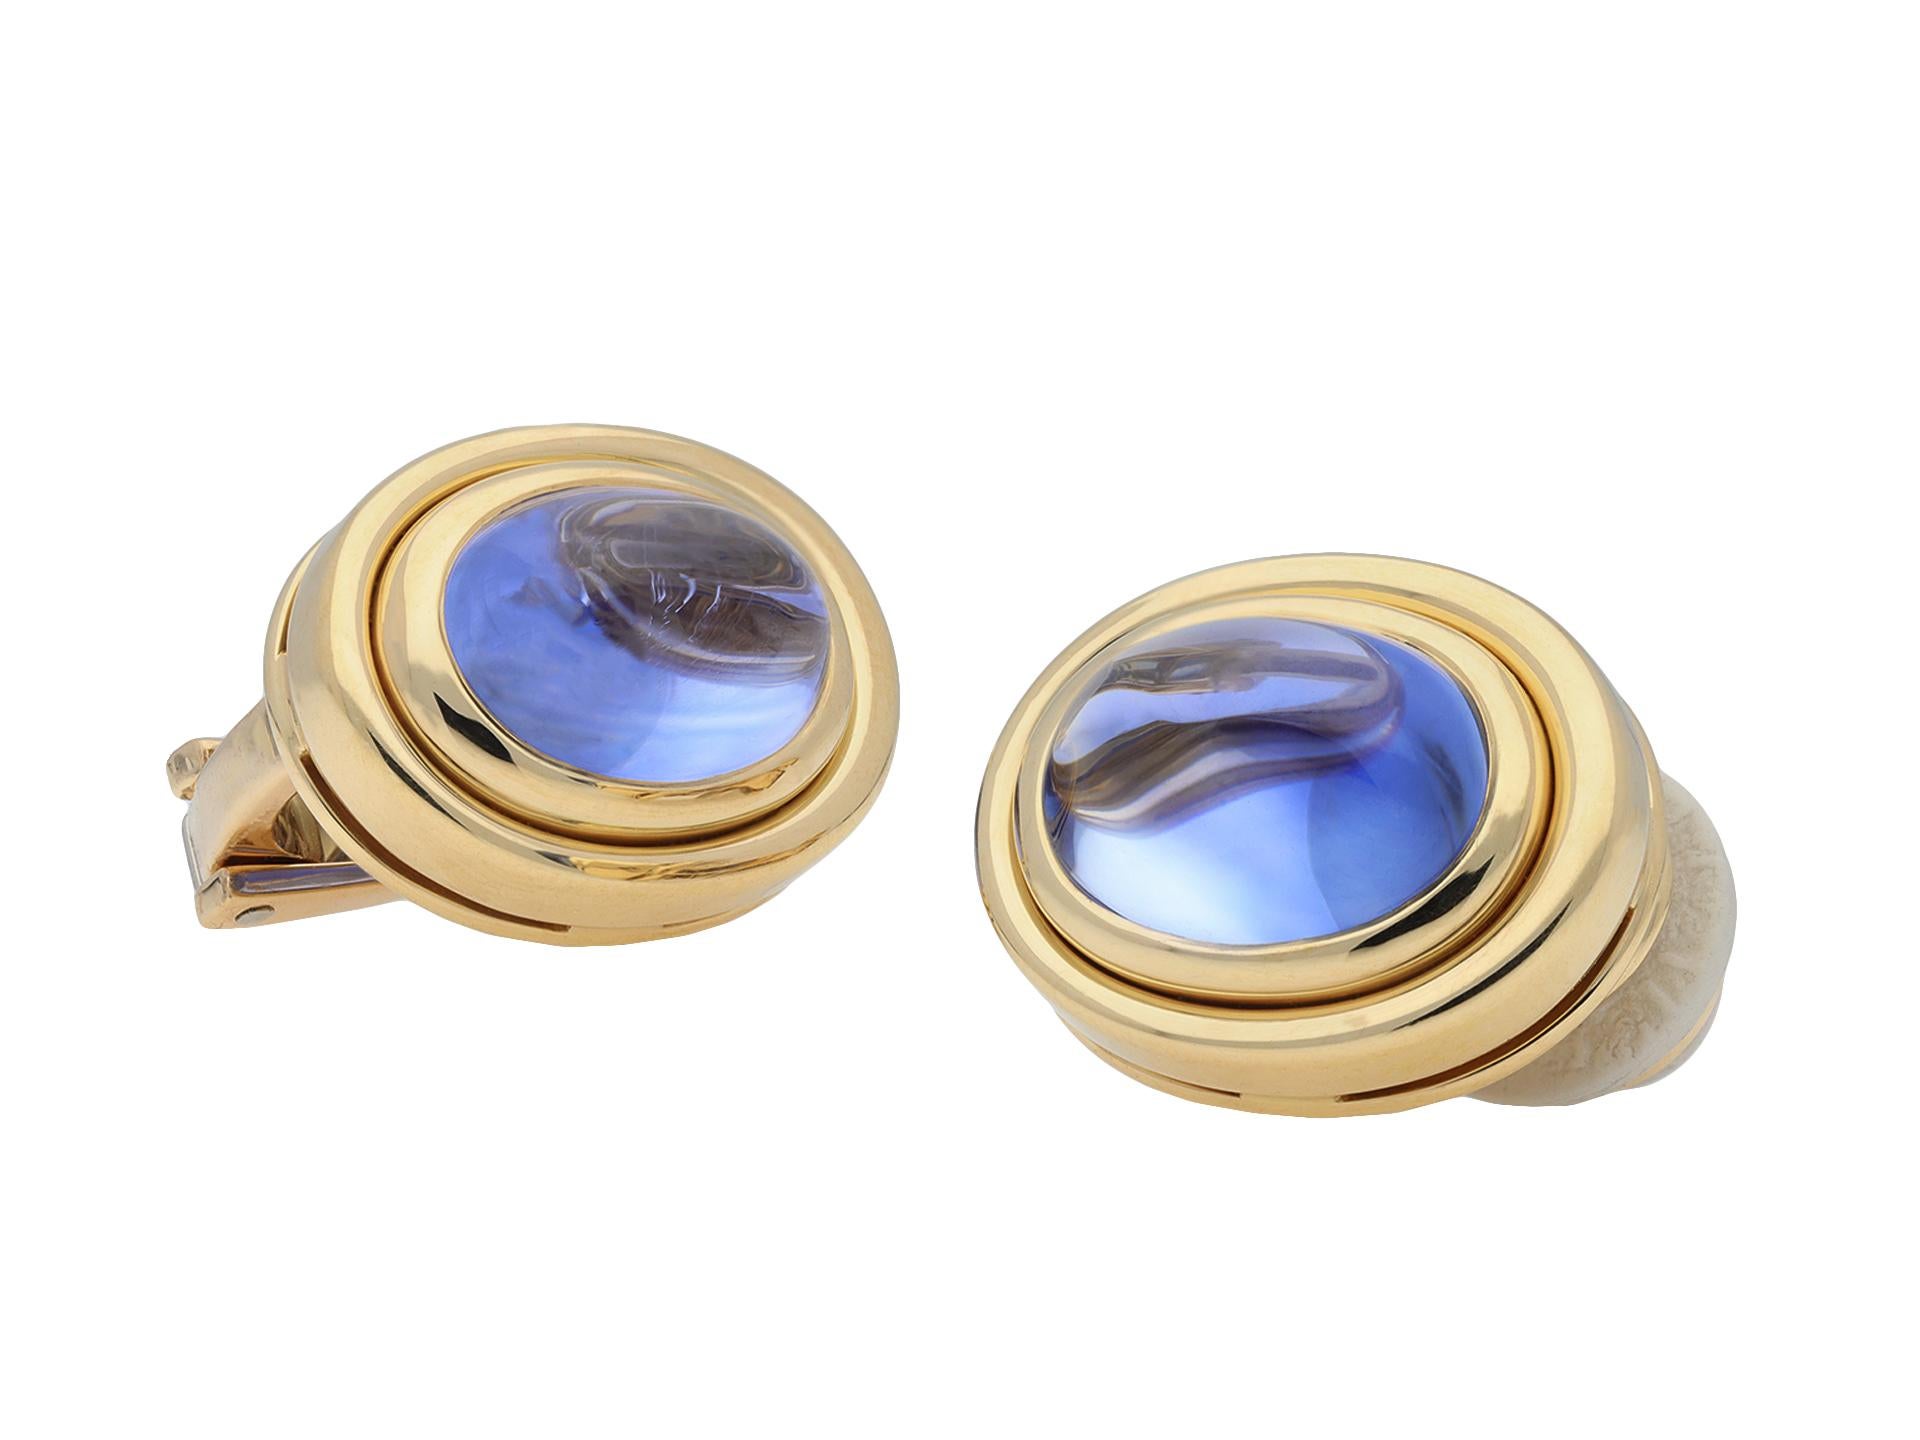 Bulgari Ceylon sapphire earrings. A matching pair of earrings, each composed of an oval cabochon natural unenhanced Ceylon sapphire in an open back rubover setting, two in total with a combined approximate weight of 10.87 carats, to a striking